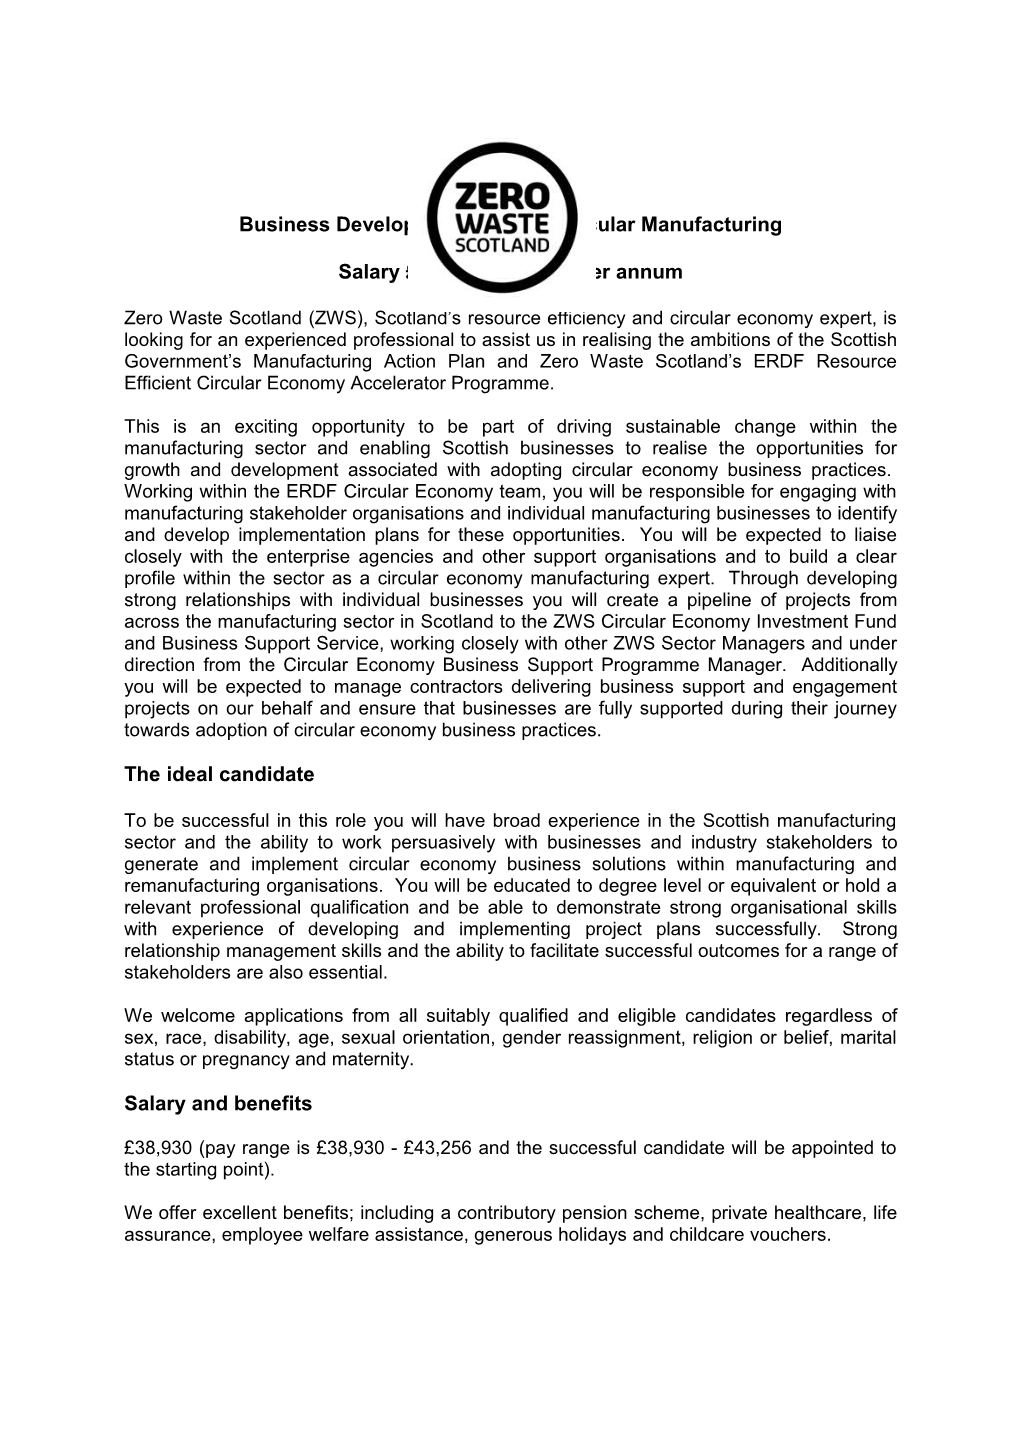 Business Development Lead for Circular Manufacturing